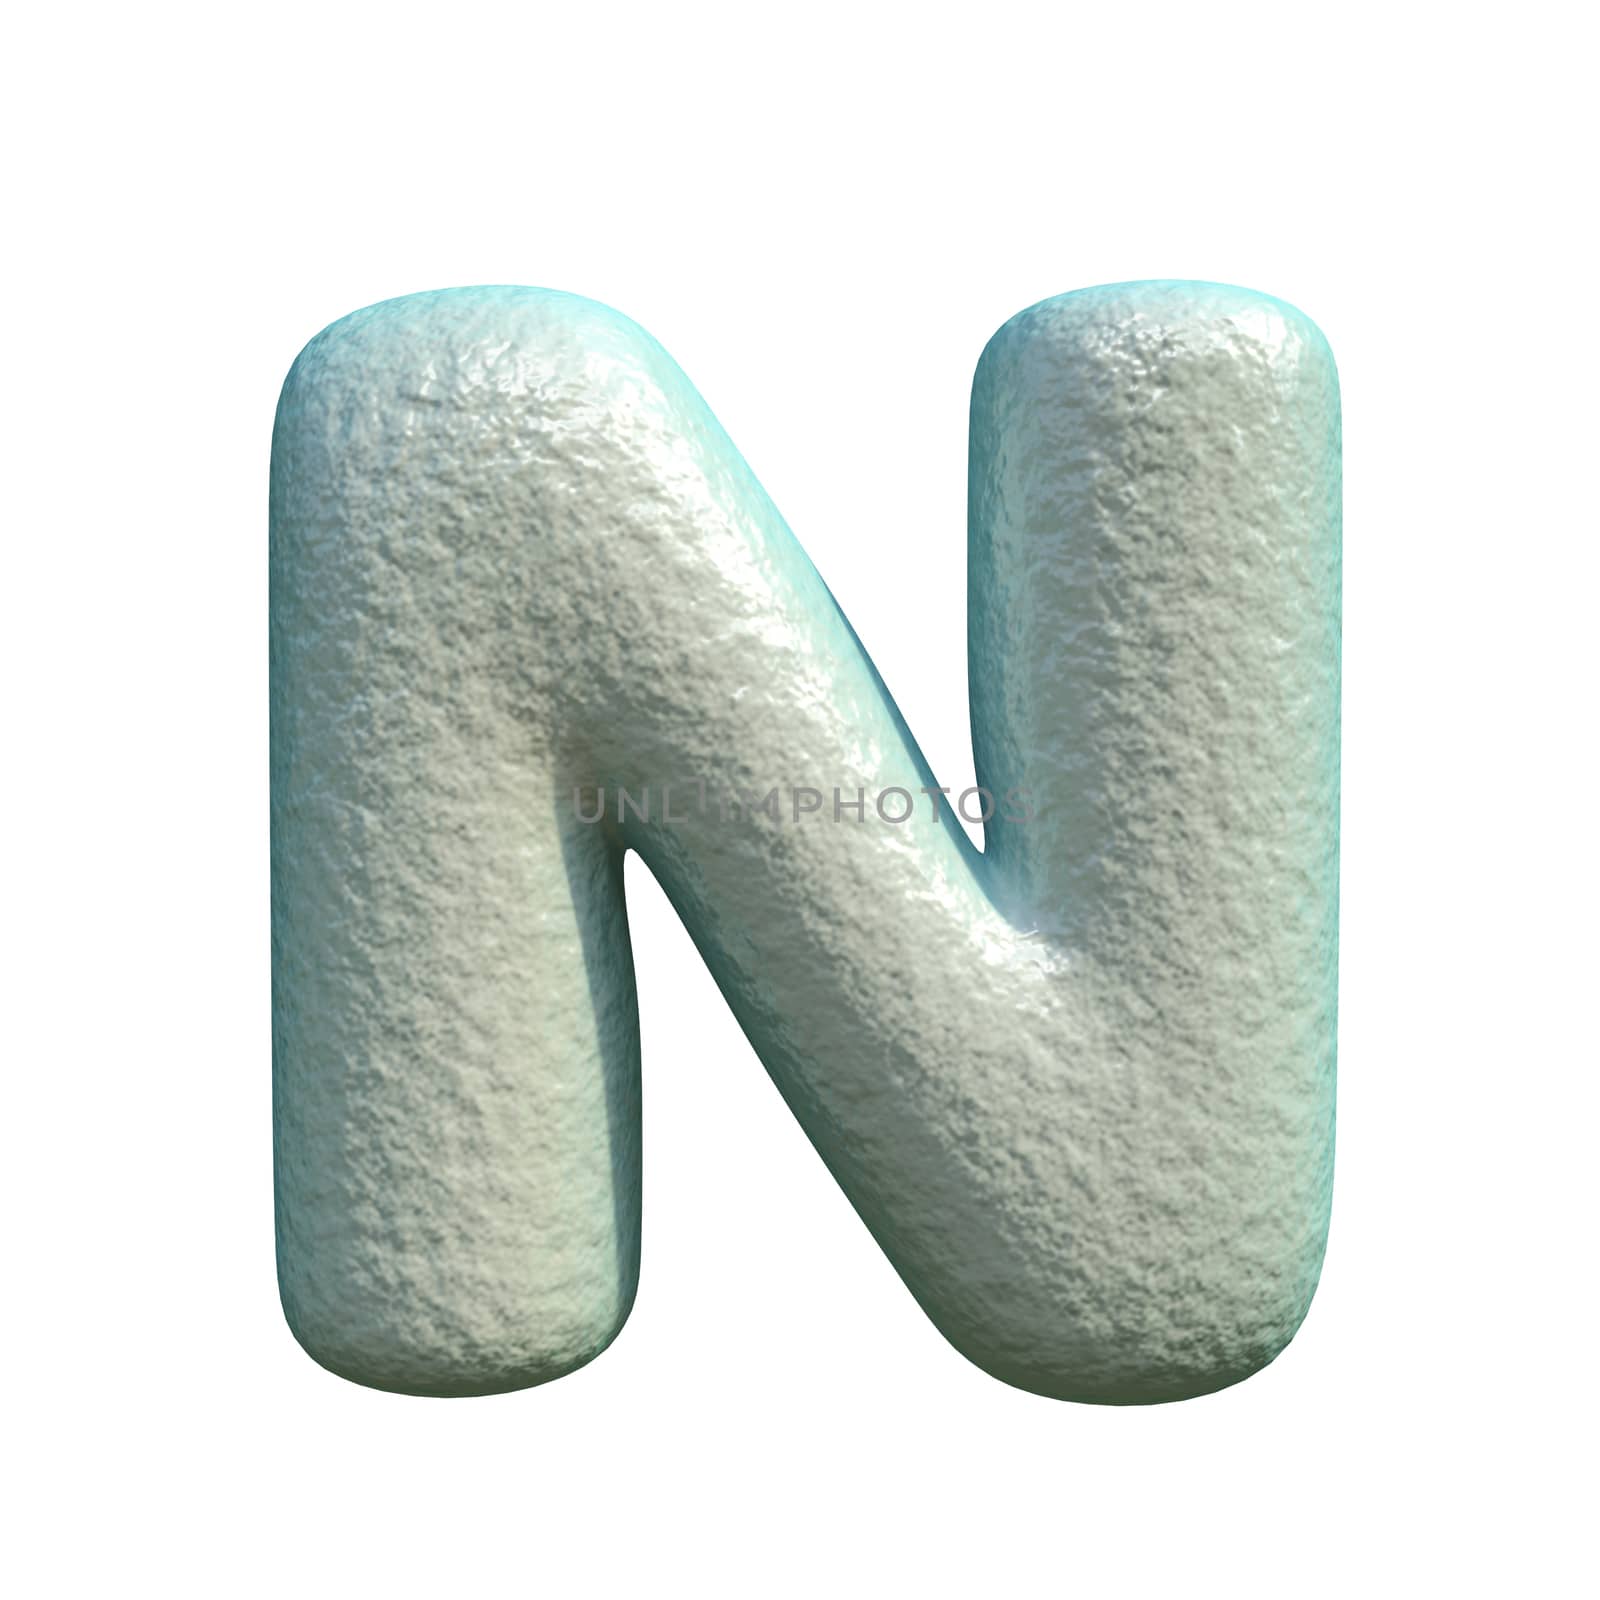 Grey blue clay font Letter N 3D by djmilic